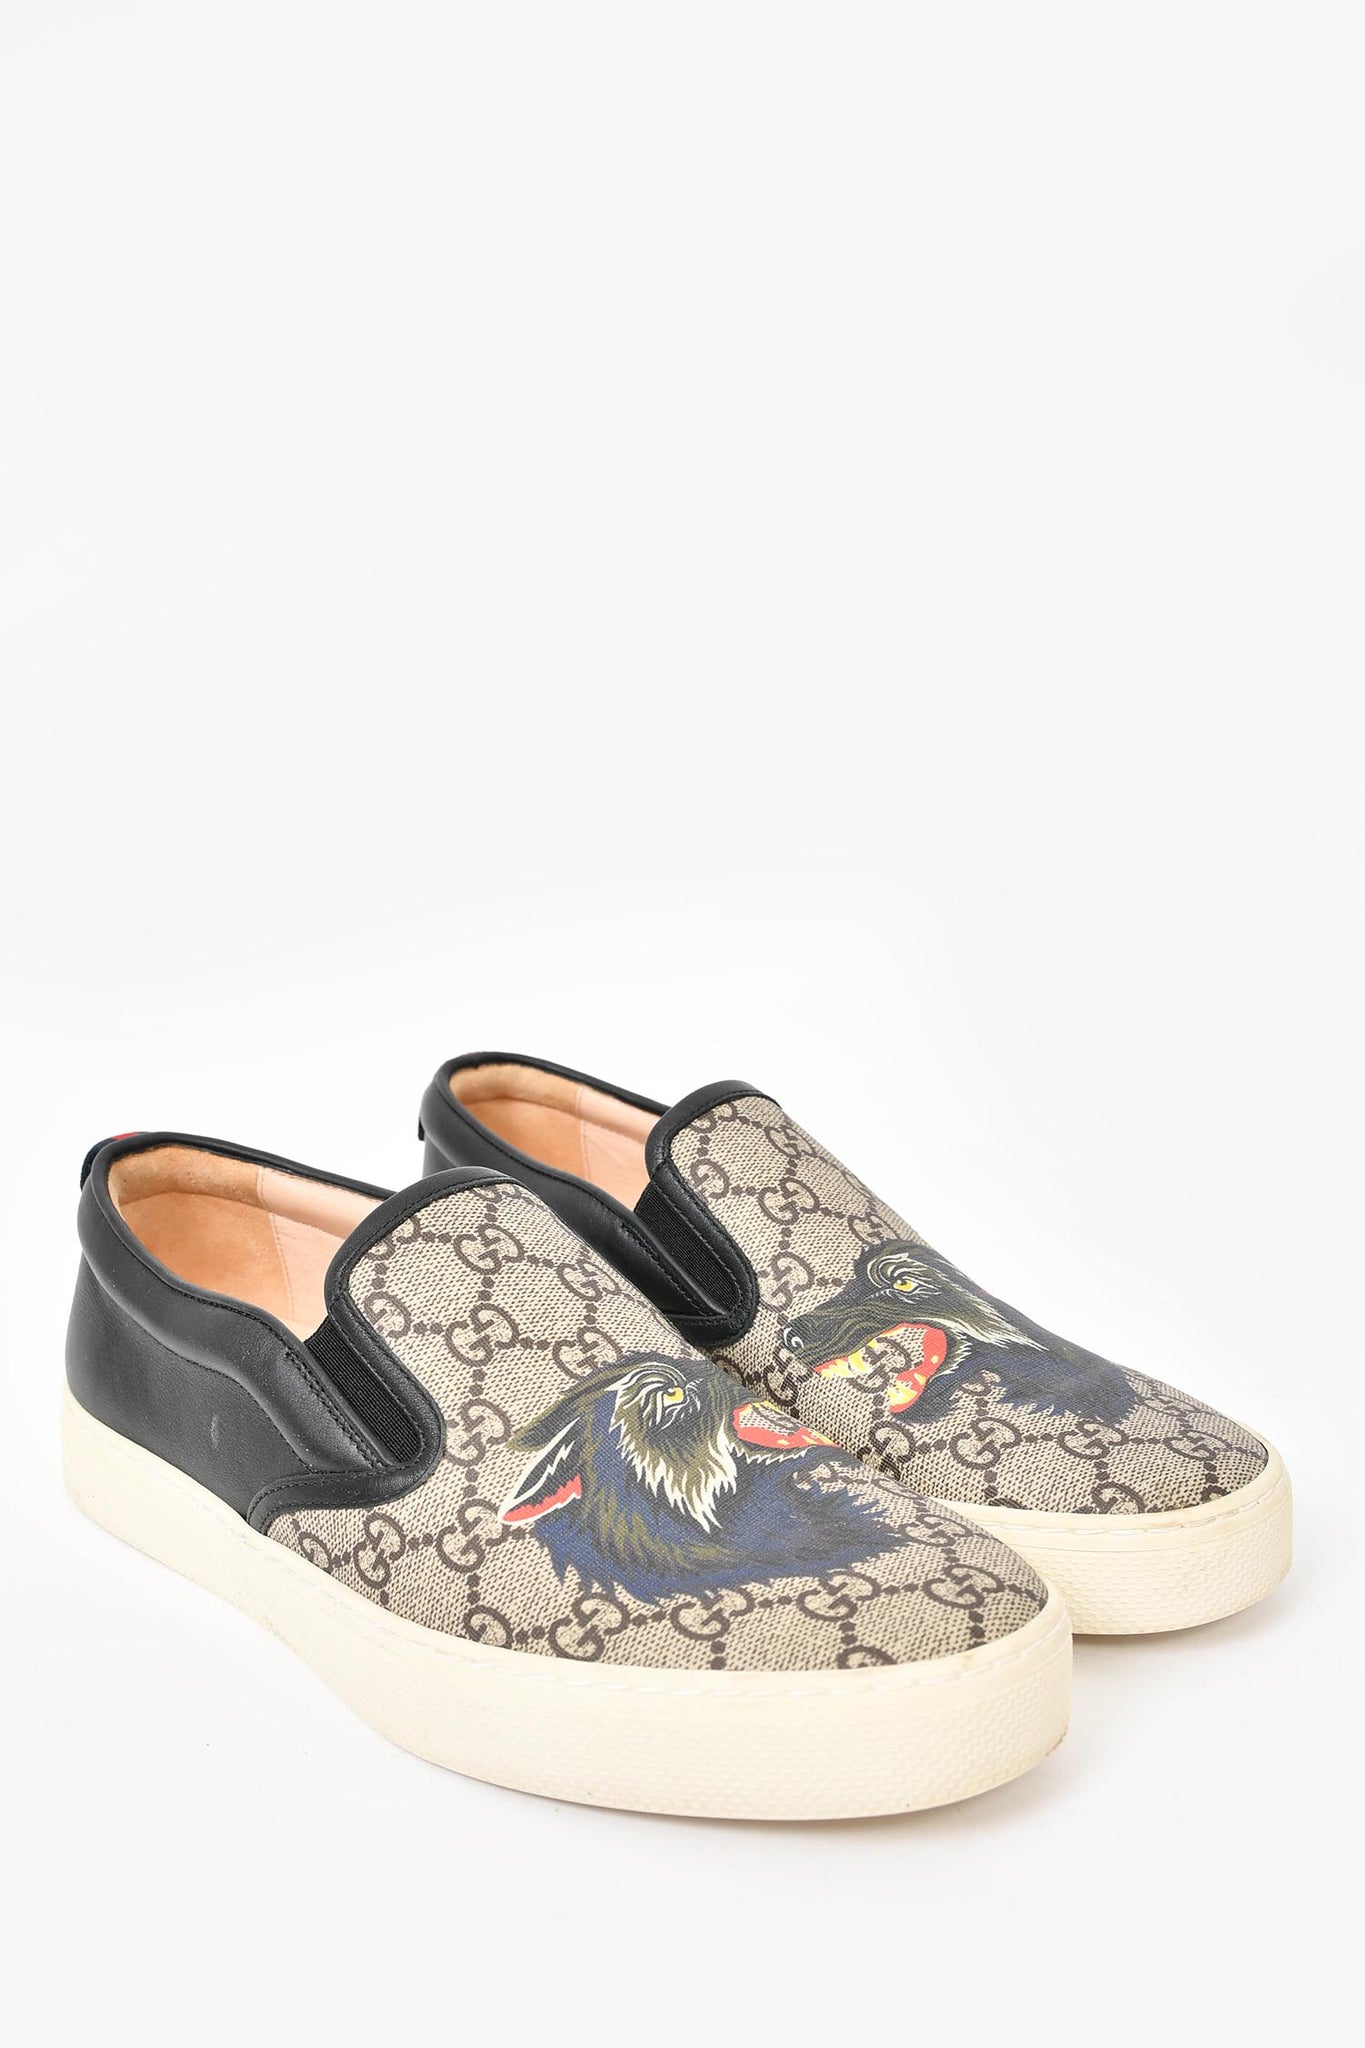 Shop the GG Supreme tiger slip-on sneaker by Gucci. A slip-on sneaker in GG  Supreme canvas with printe…